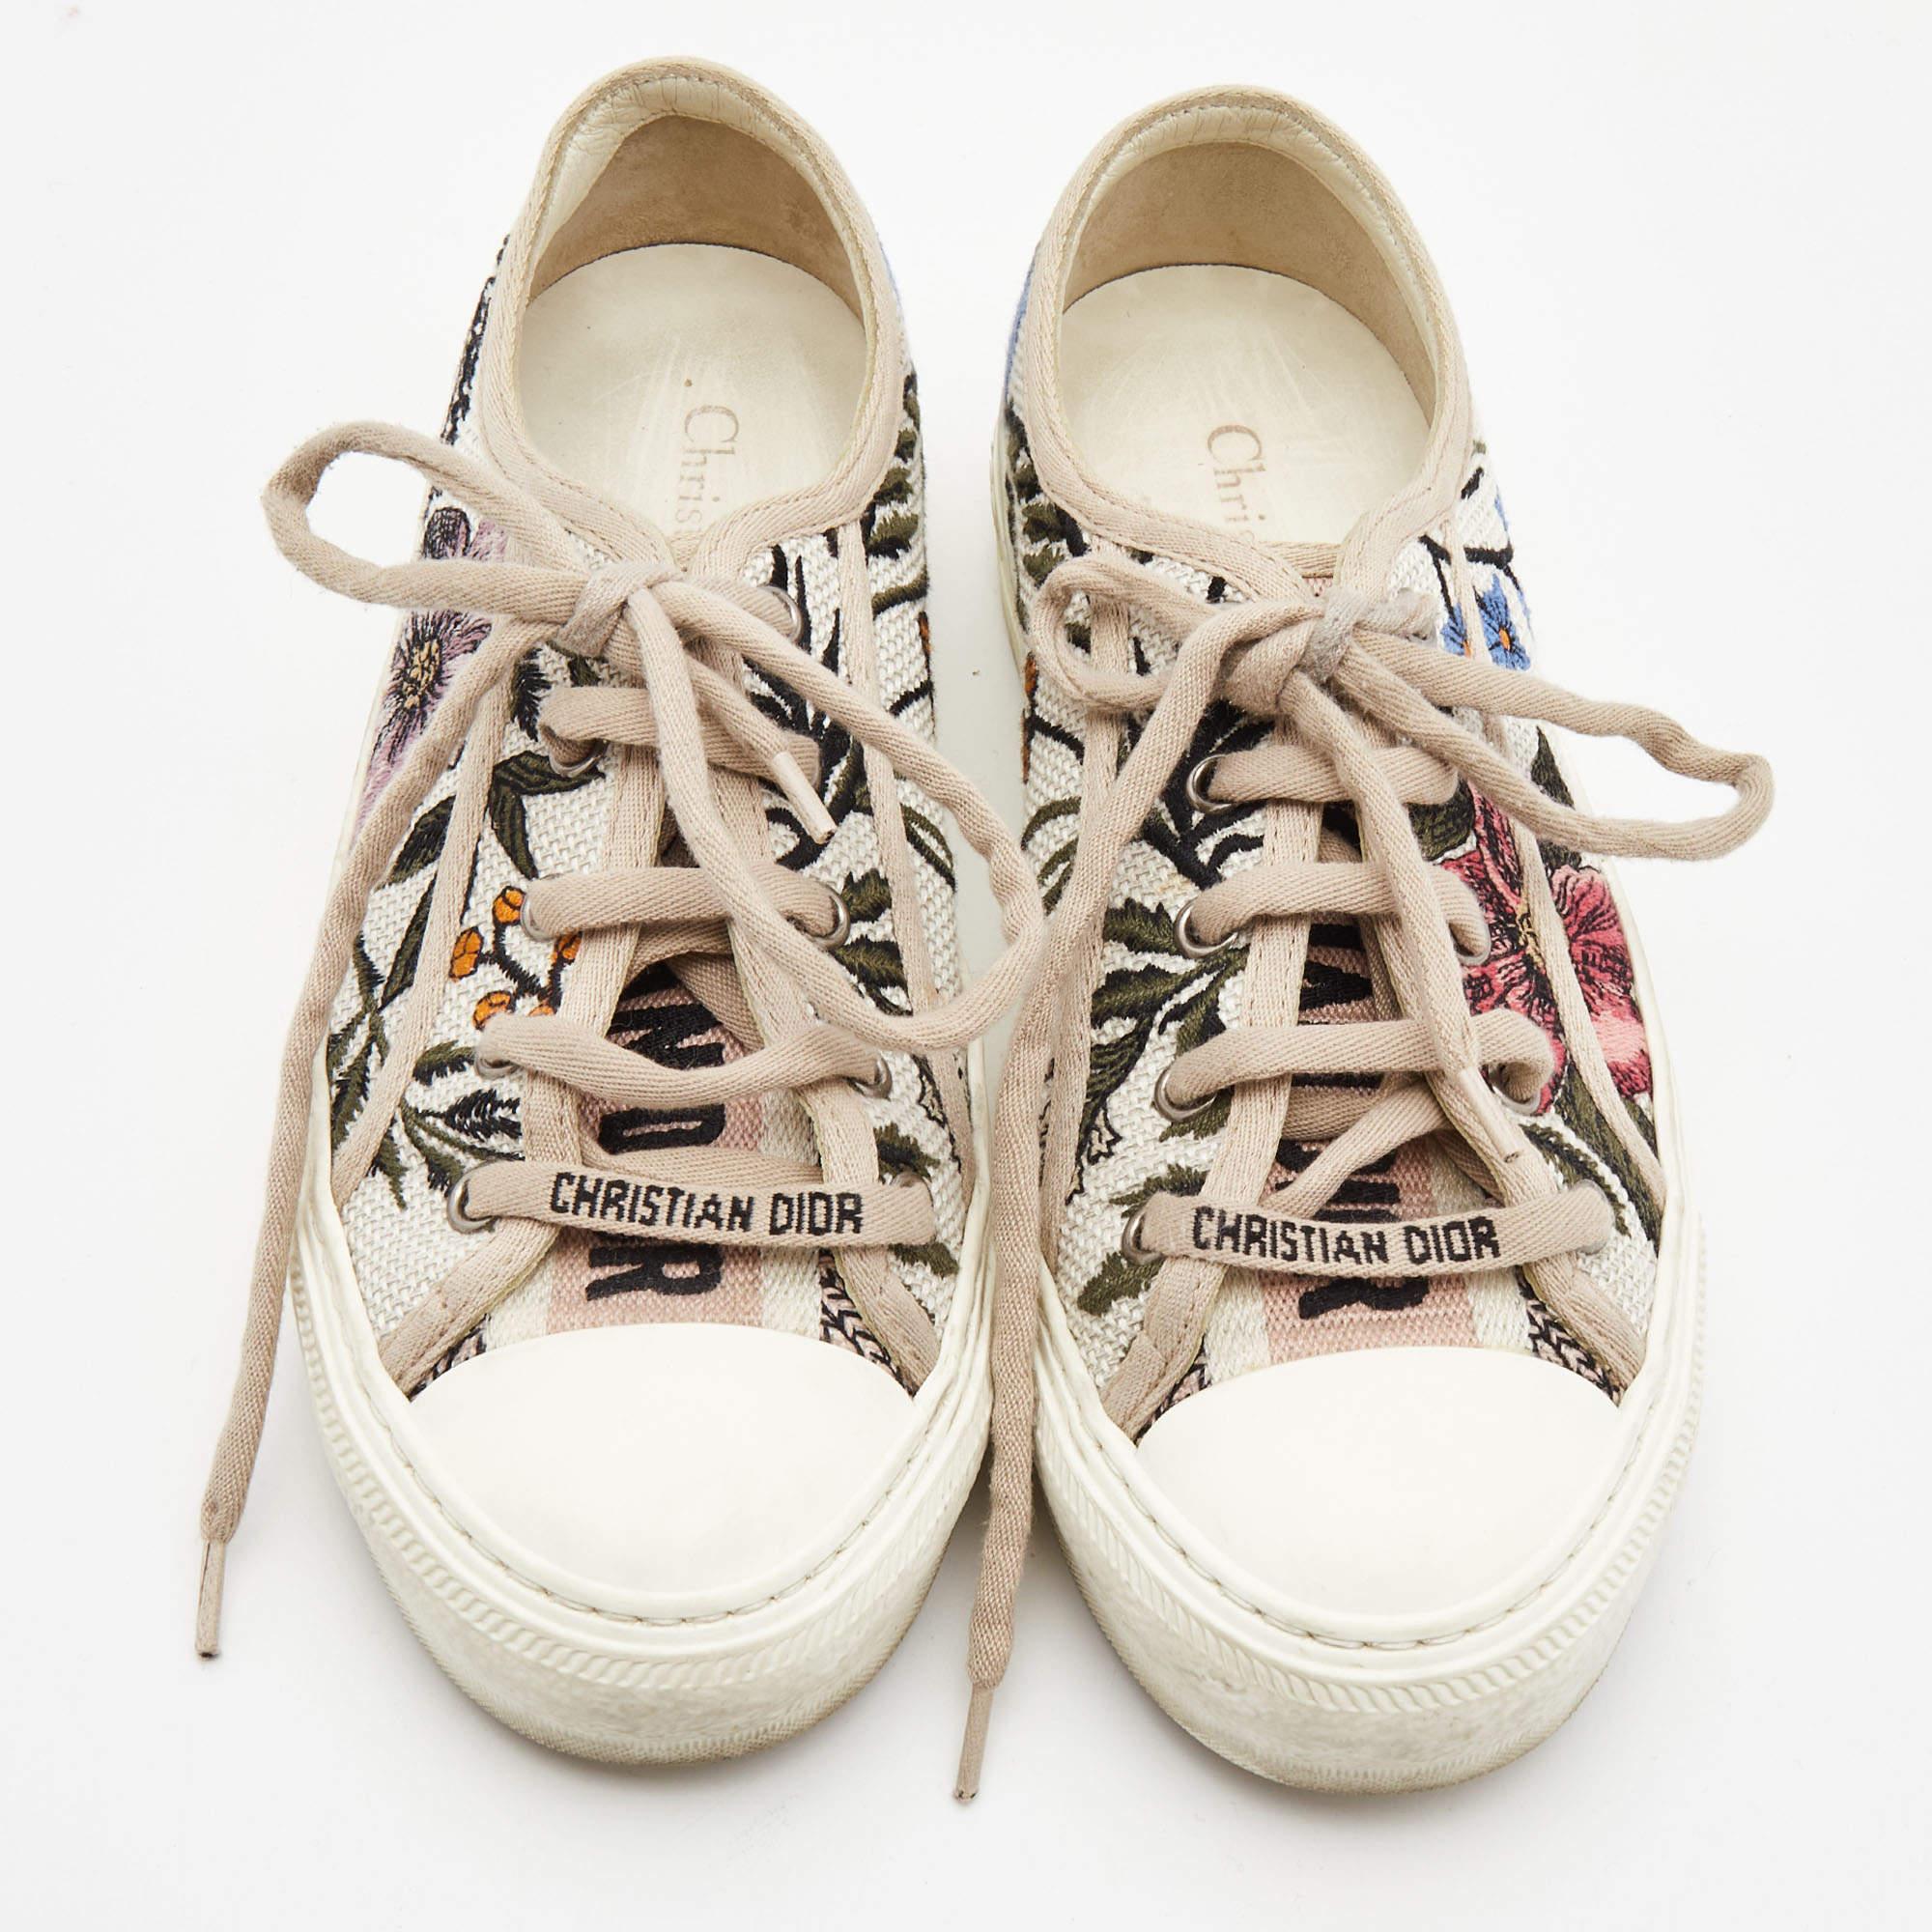 Give your outfit a chic update with this pair of designer sneakers. The creation is sewn perfectly to help you make a statement in them for a long time.

Includes
Original Dustbag